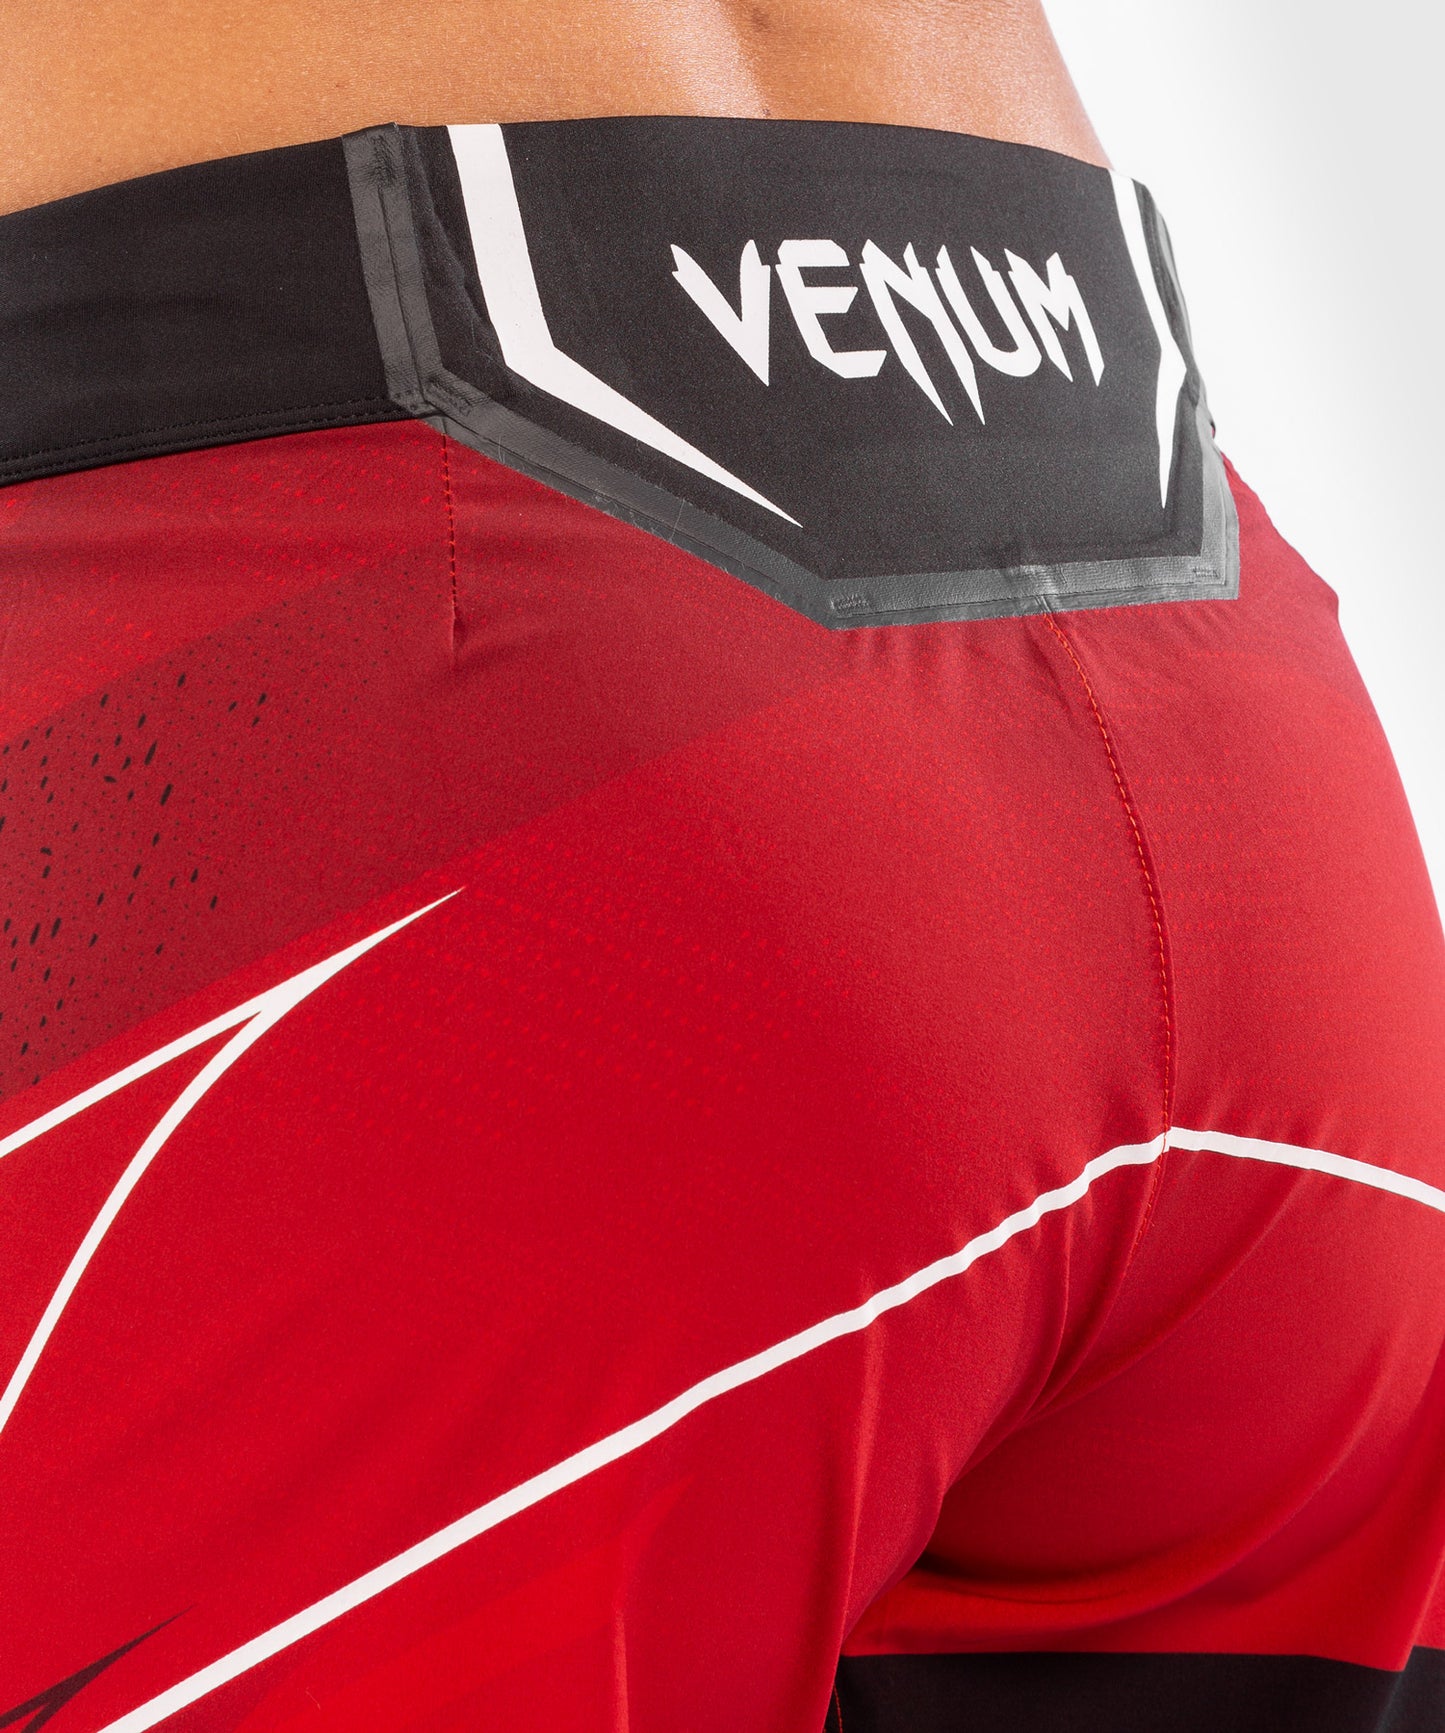 UFC Venum Authentic Fight Night Women's Shorts - Long Fit - Red